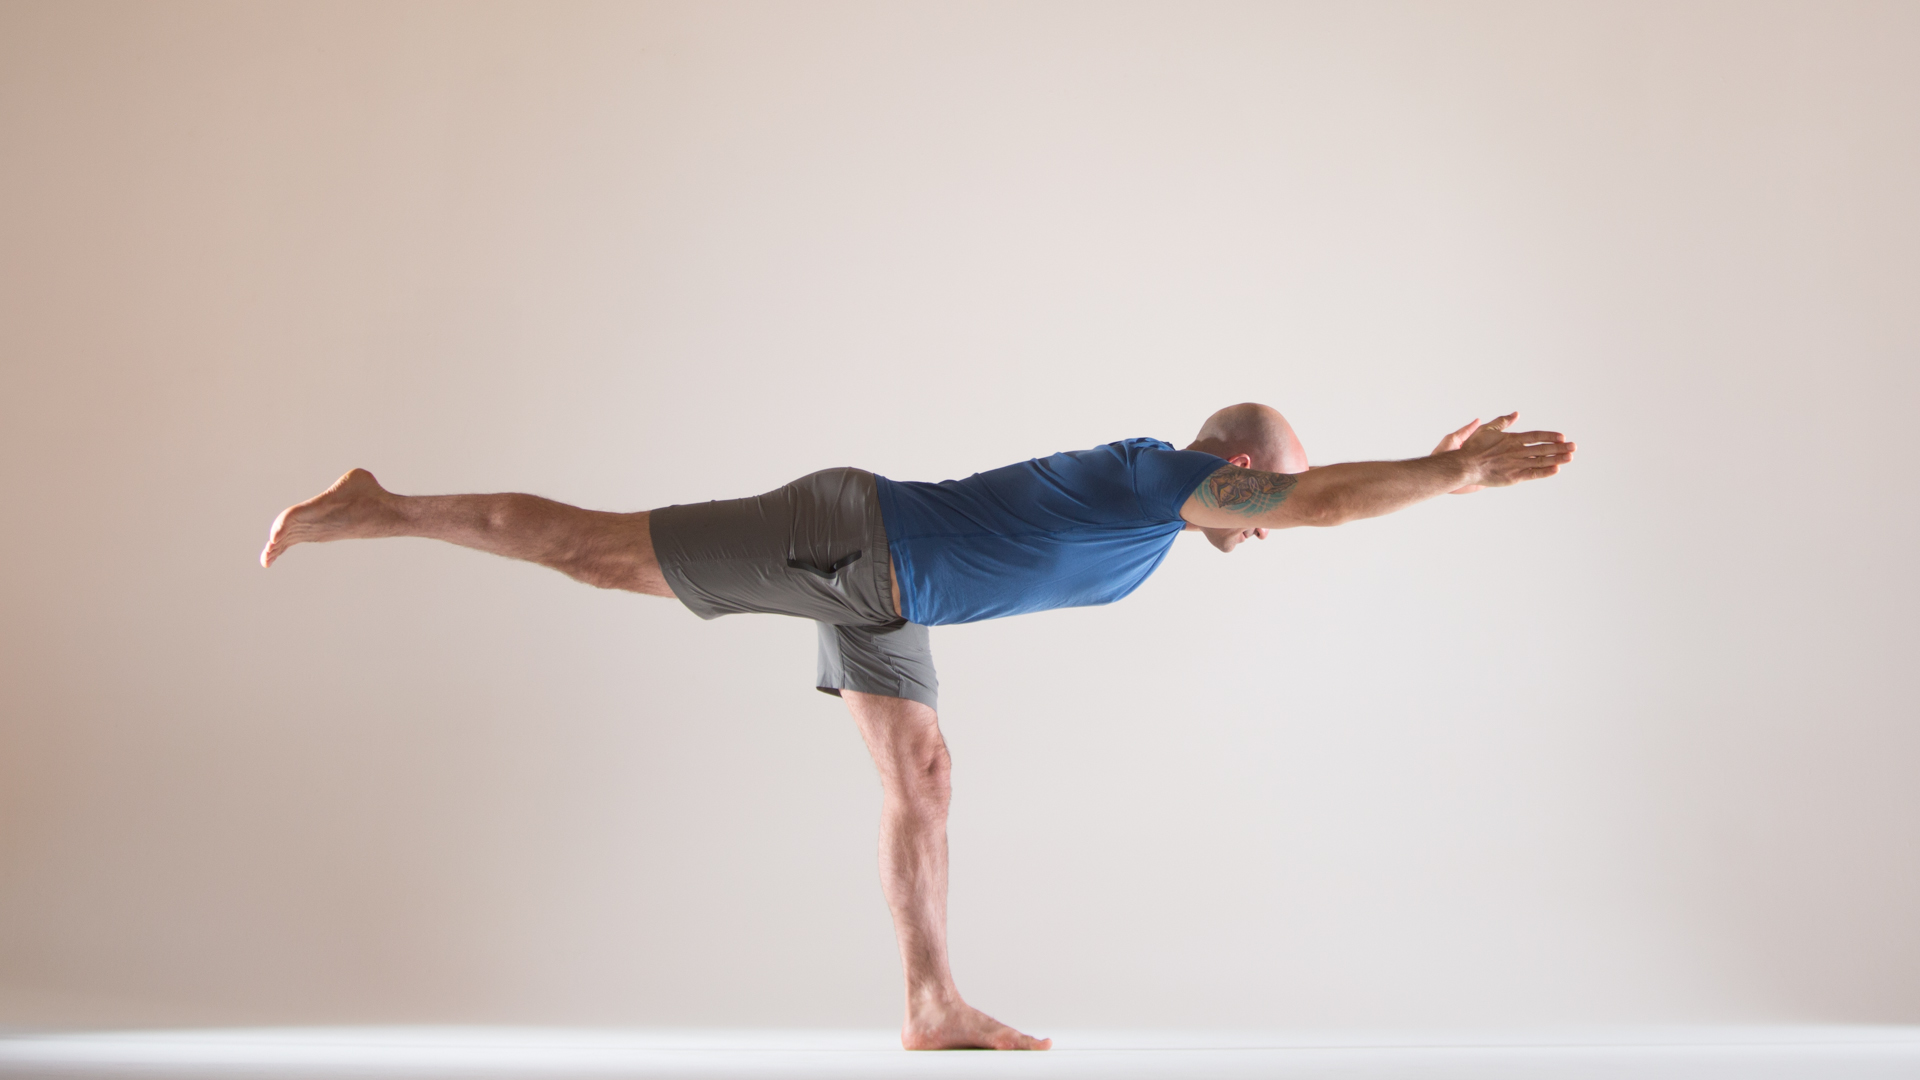 Warrior 3 Yoga Pose At the Wall: Variations with Props - YogaUOnline